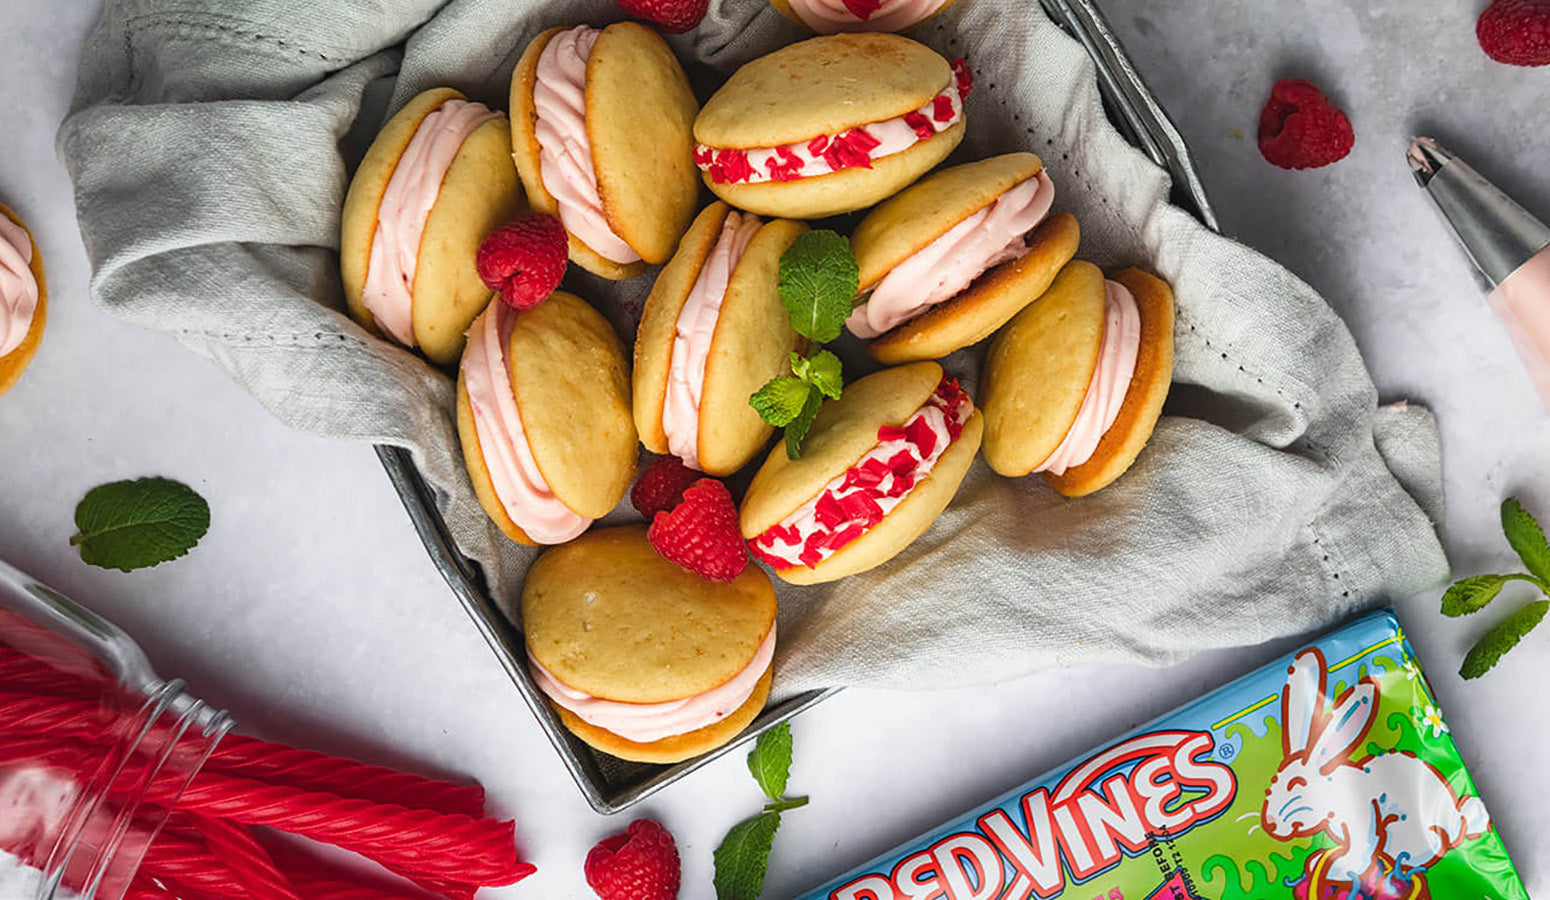 Raspberry Whoopie Pies made with Red Vines Easter candy